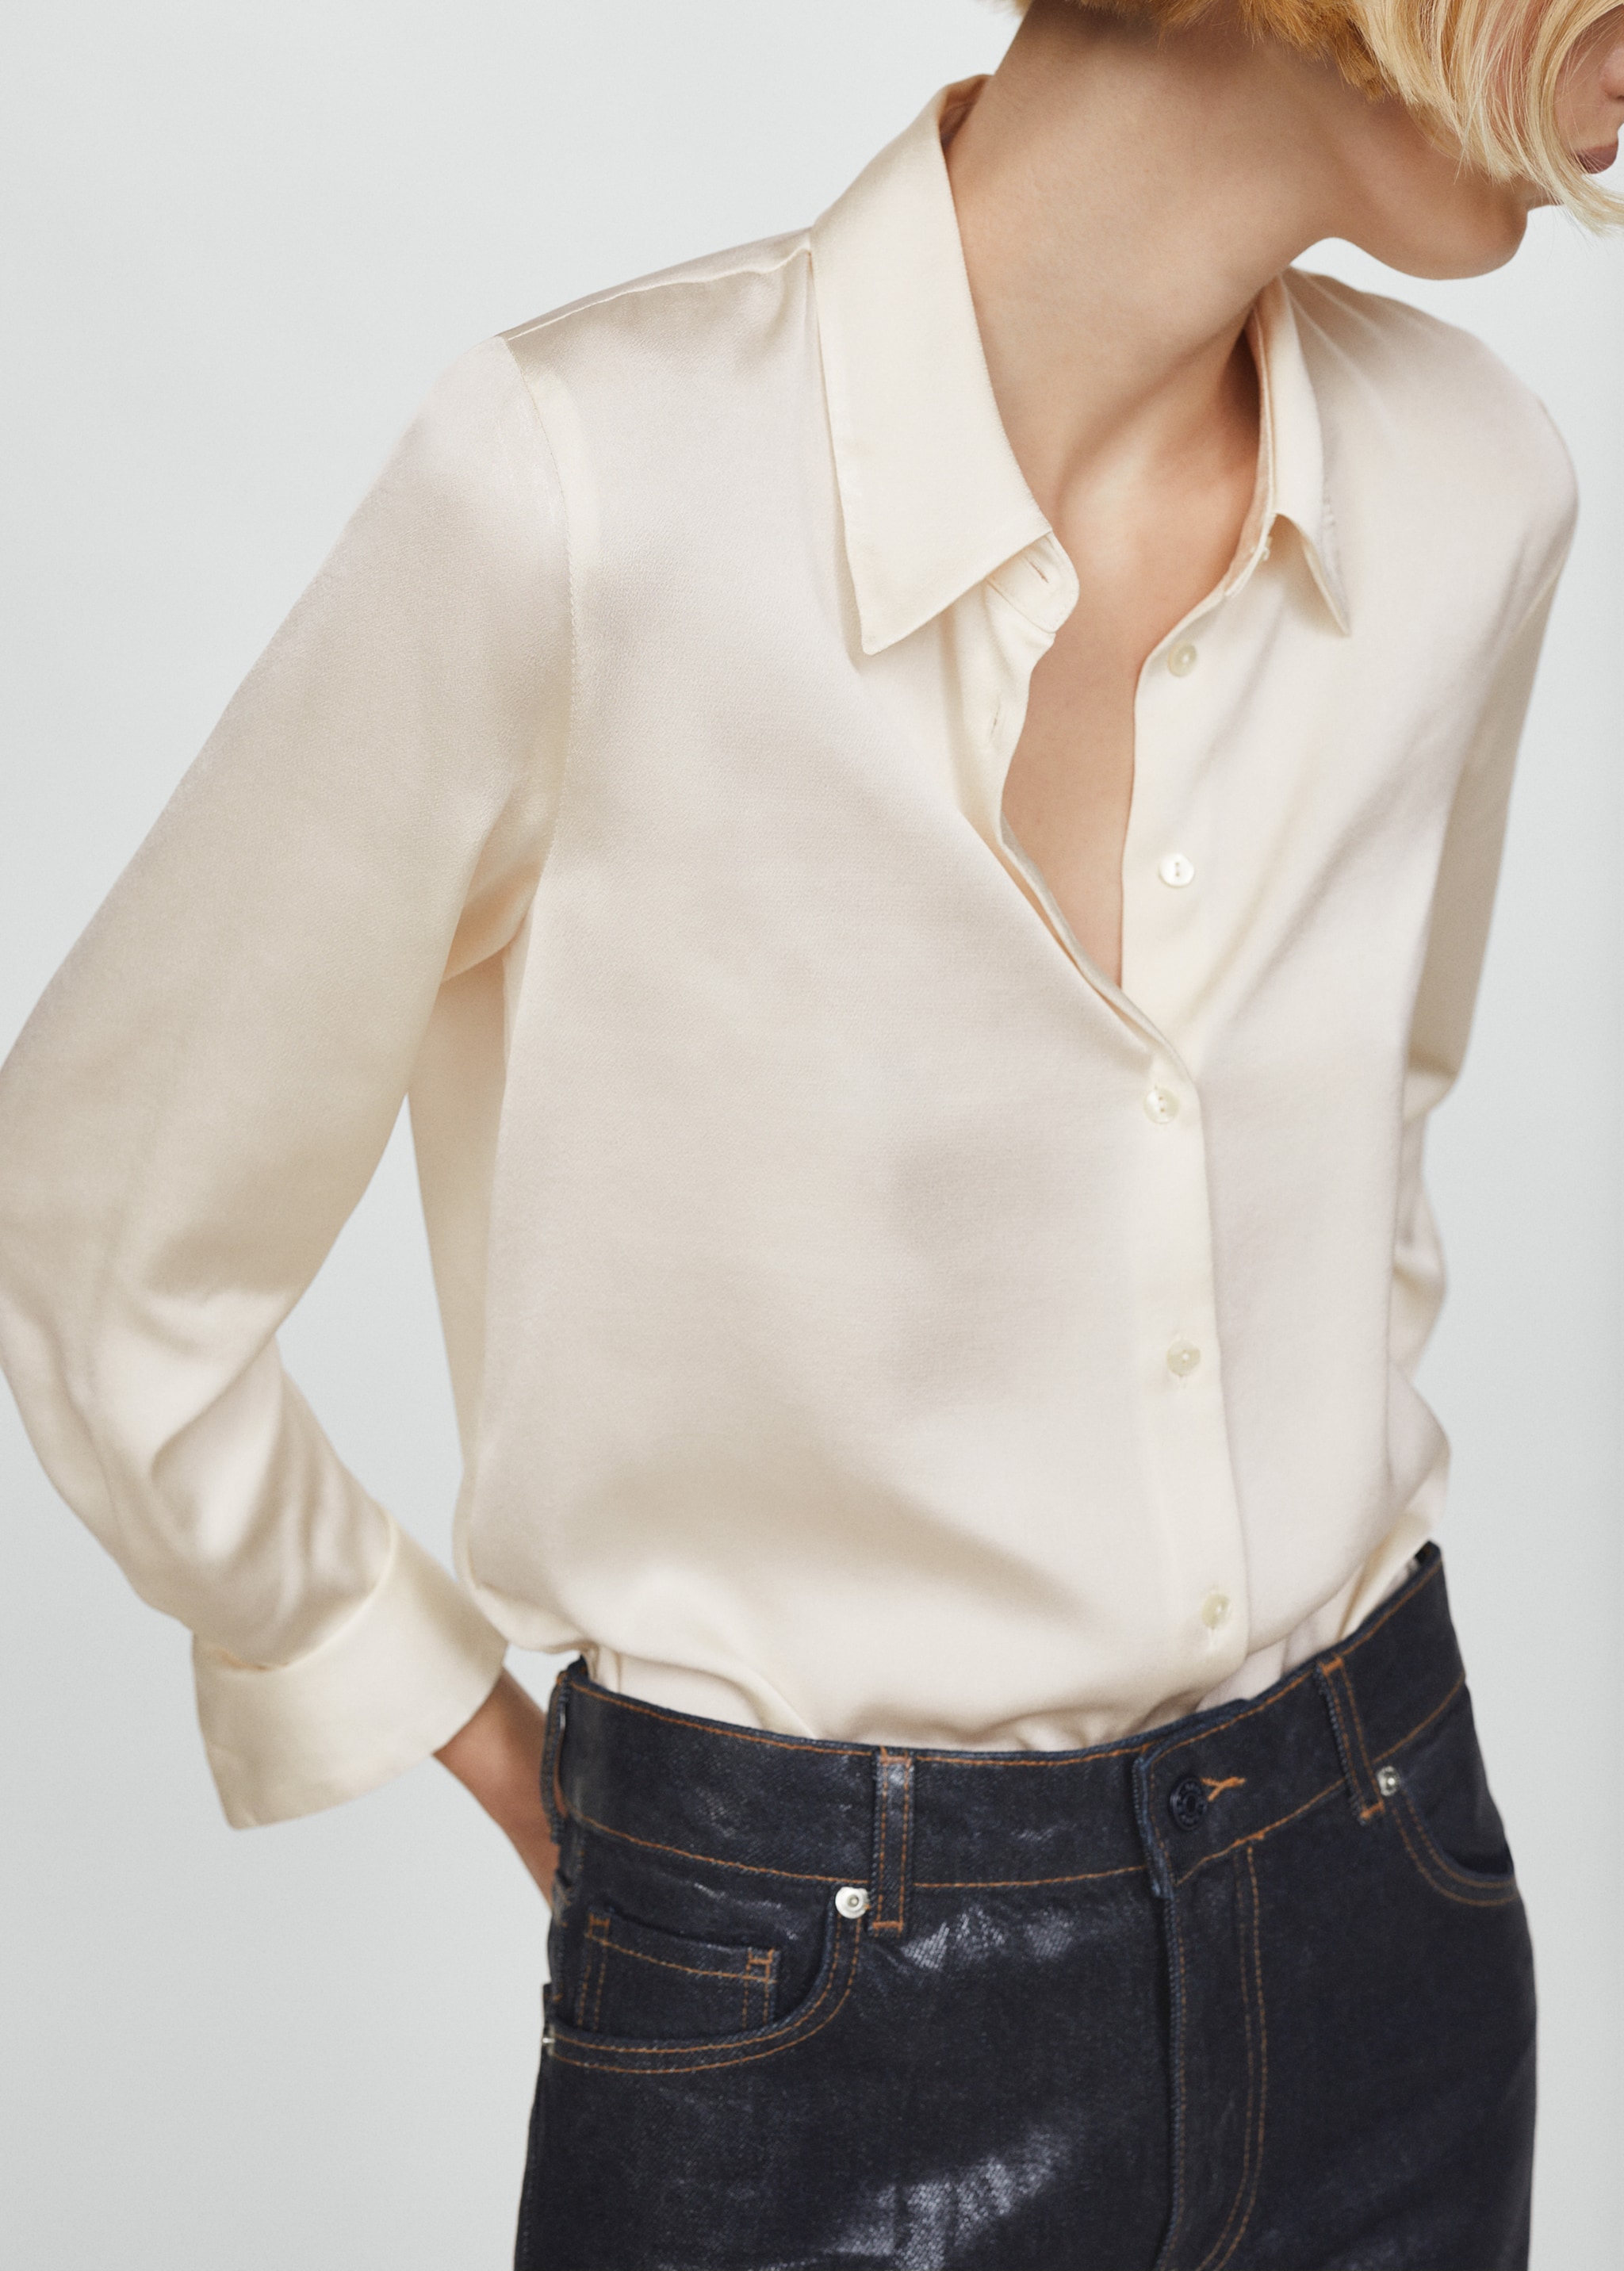 Satin finish flowy shirt - Details of the article 6